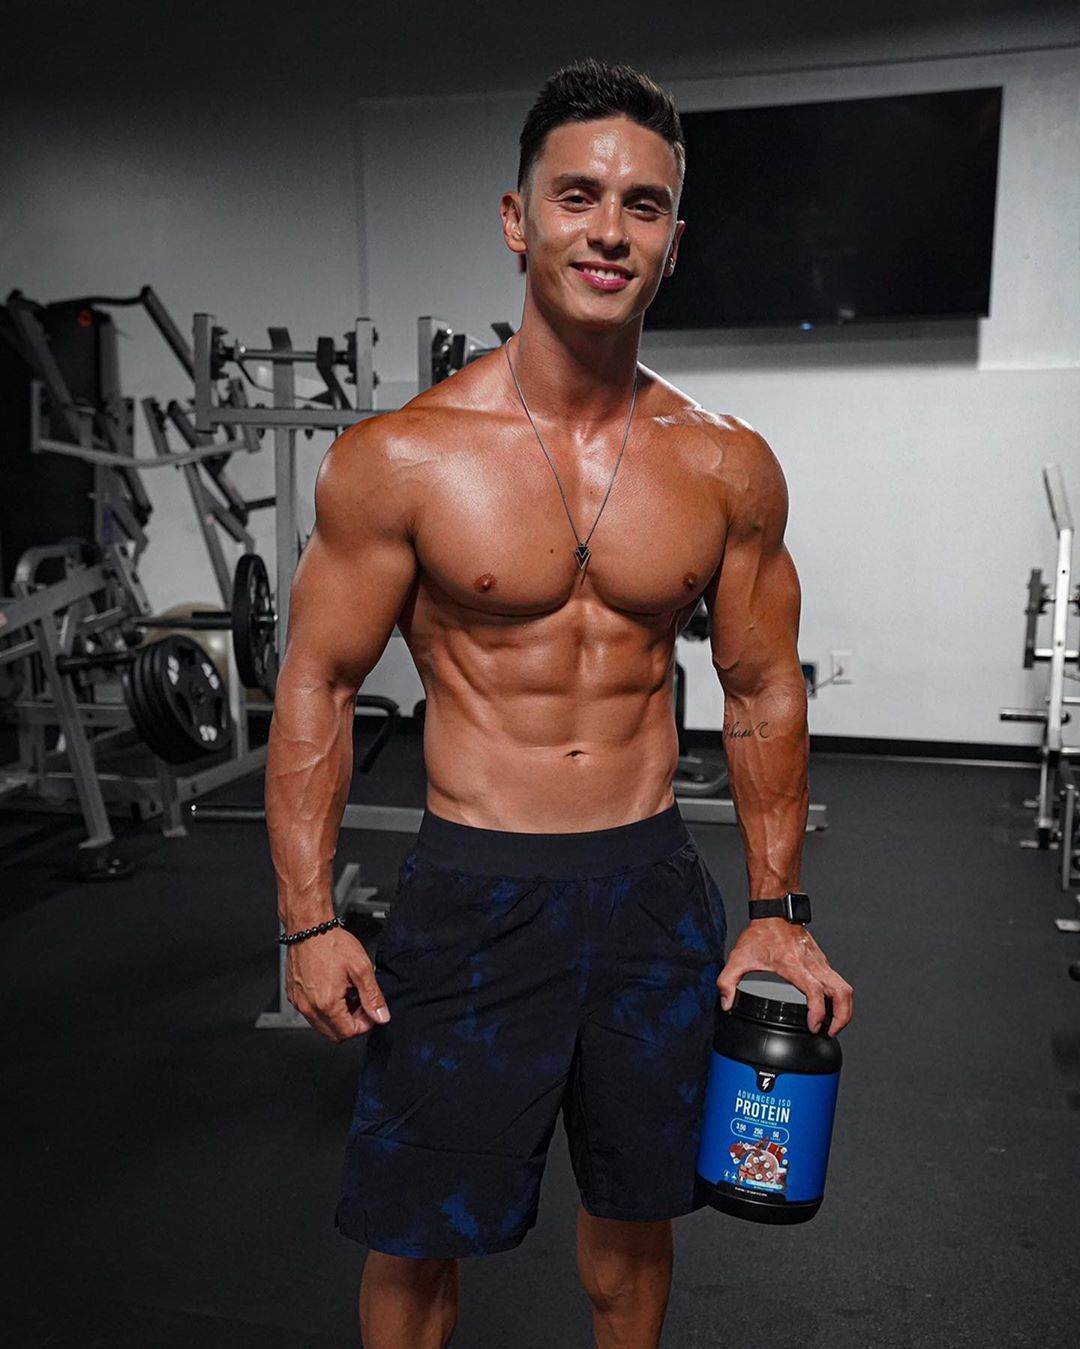 Workout Wednesday - Abs with Christian Fleenor